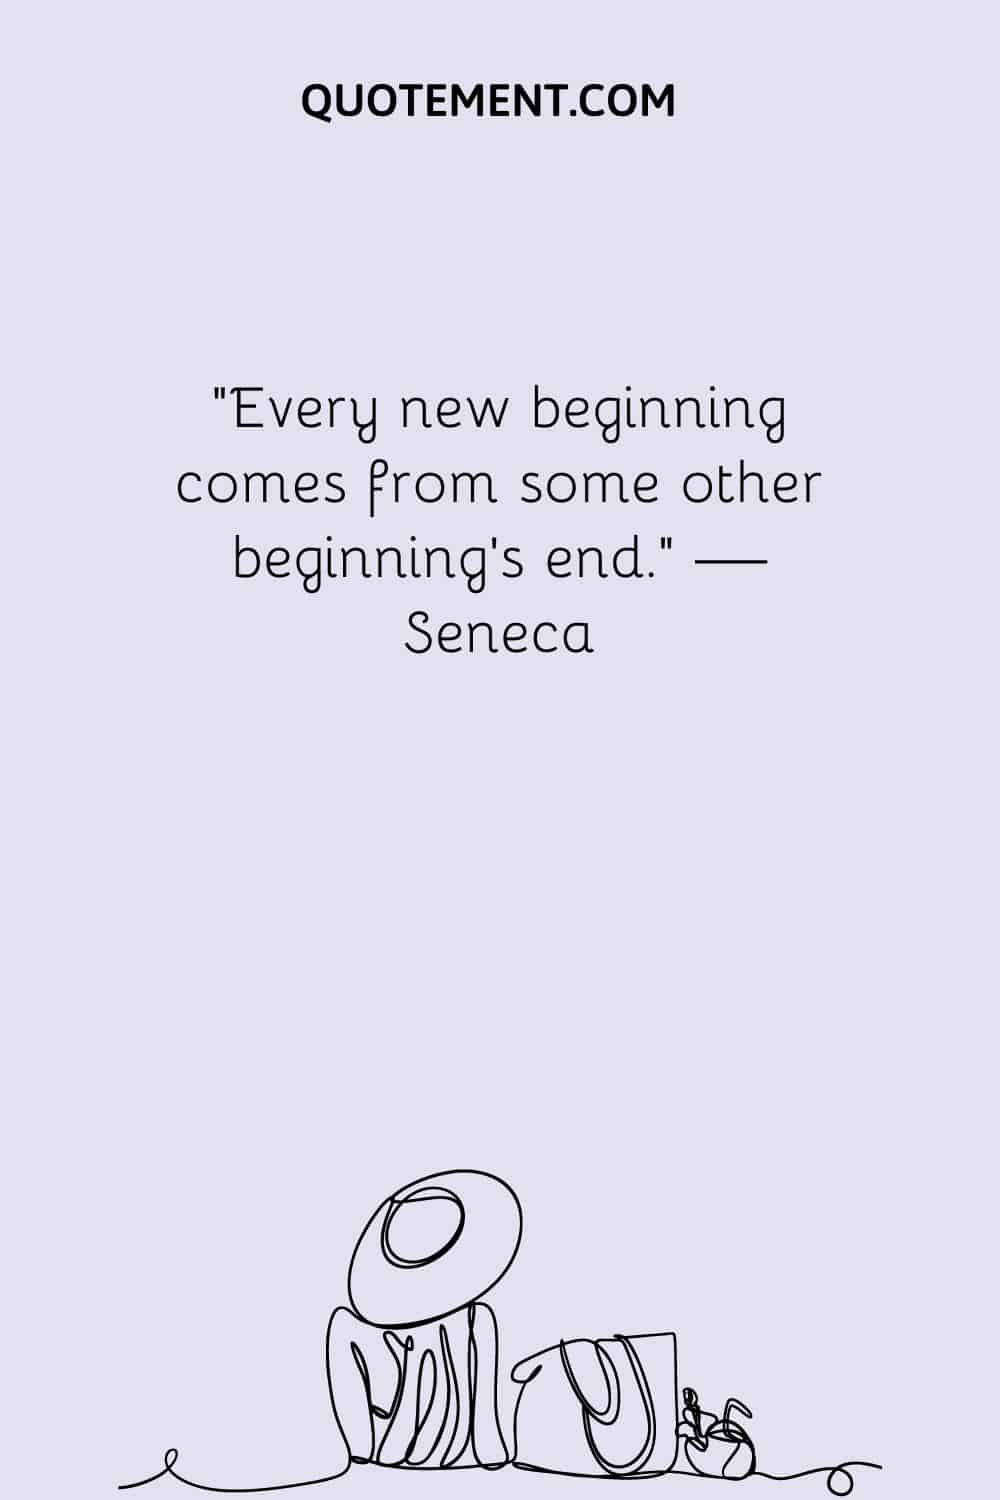 Every new beginning comes from some other beginning’s end